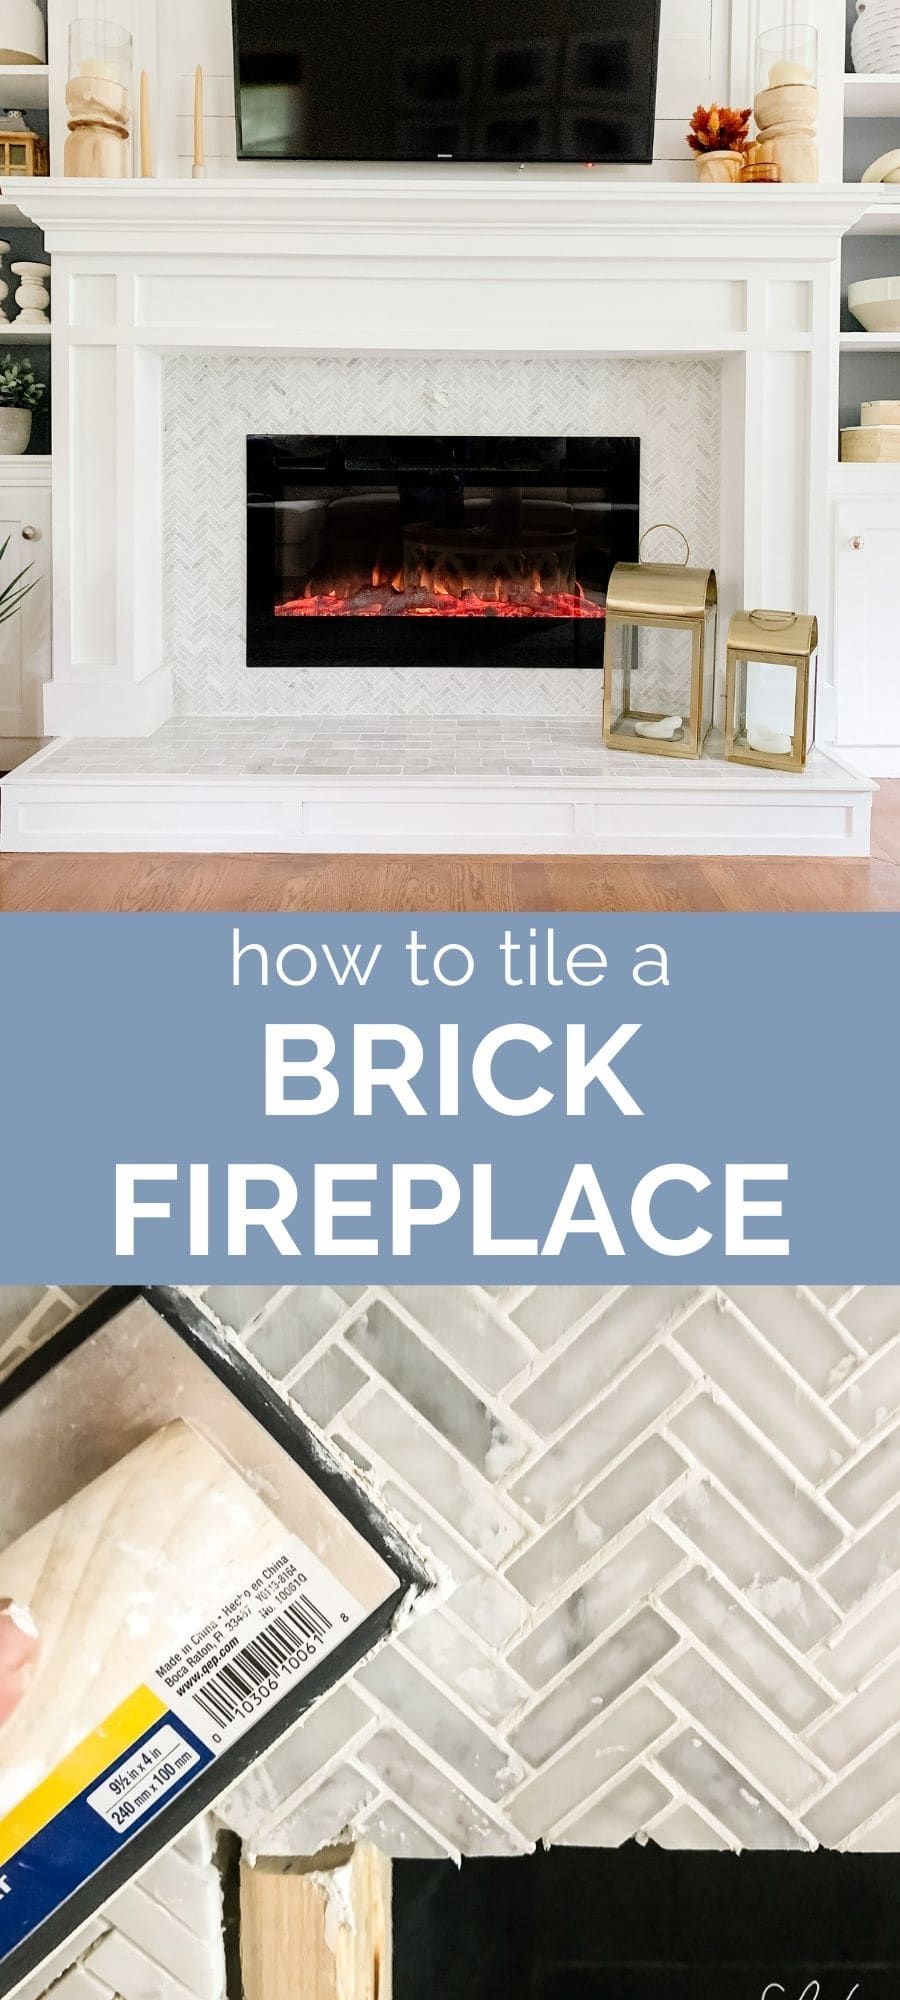 How To Tile A Brick Fireplace Jenna, How To Install Stone Tile Over Brick Fireplace